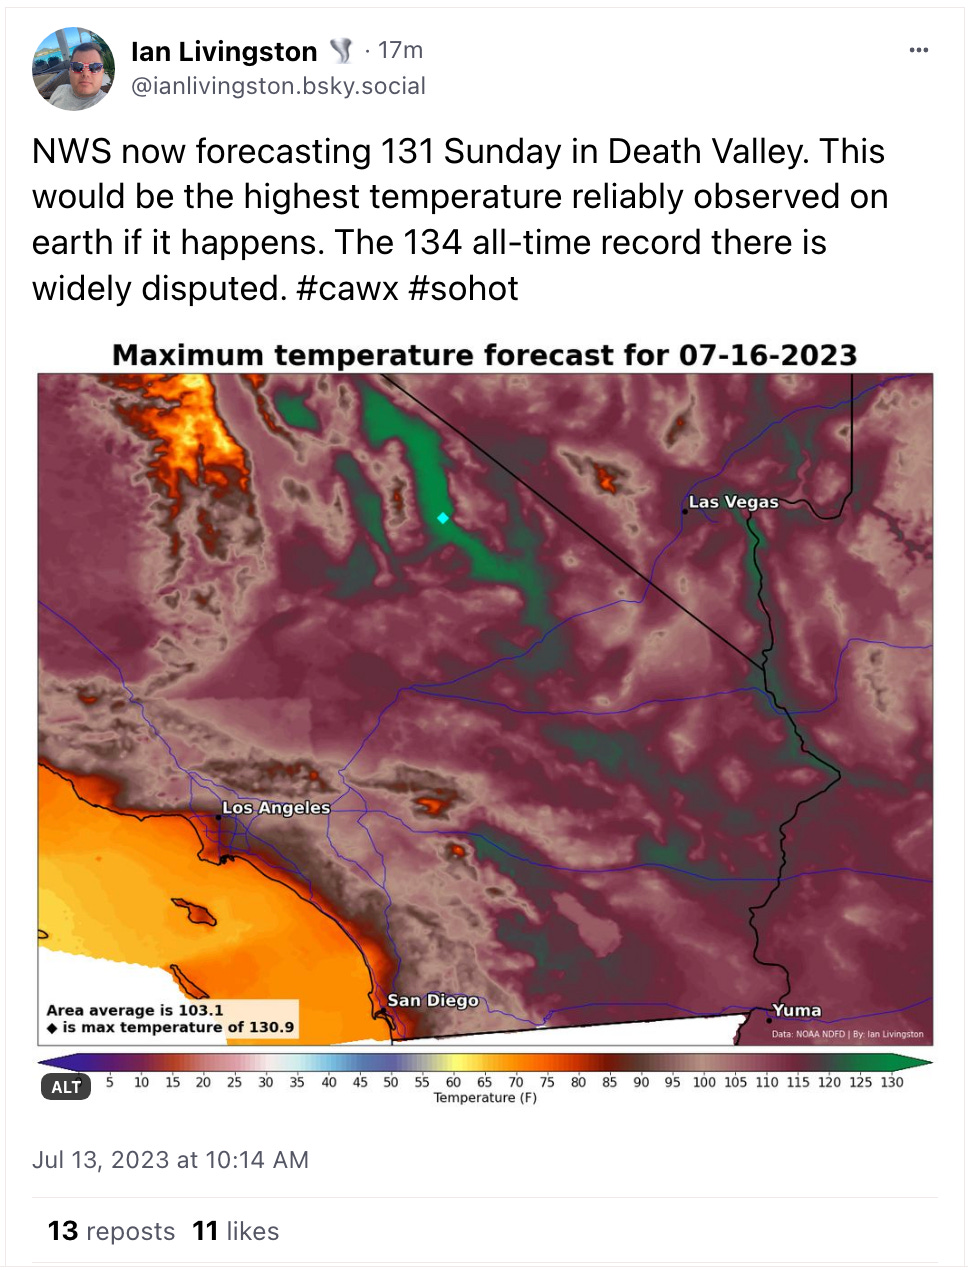 NWS now forecasting 131 Sunday in Death Valley. This would be the highest temperature reliably observed on earth if it happens. The 134 all-time record there is widely disputed.